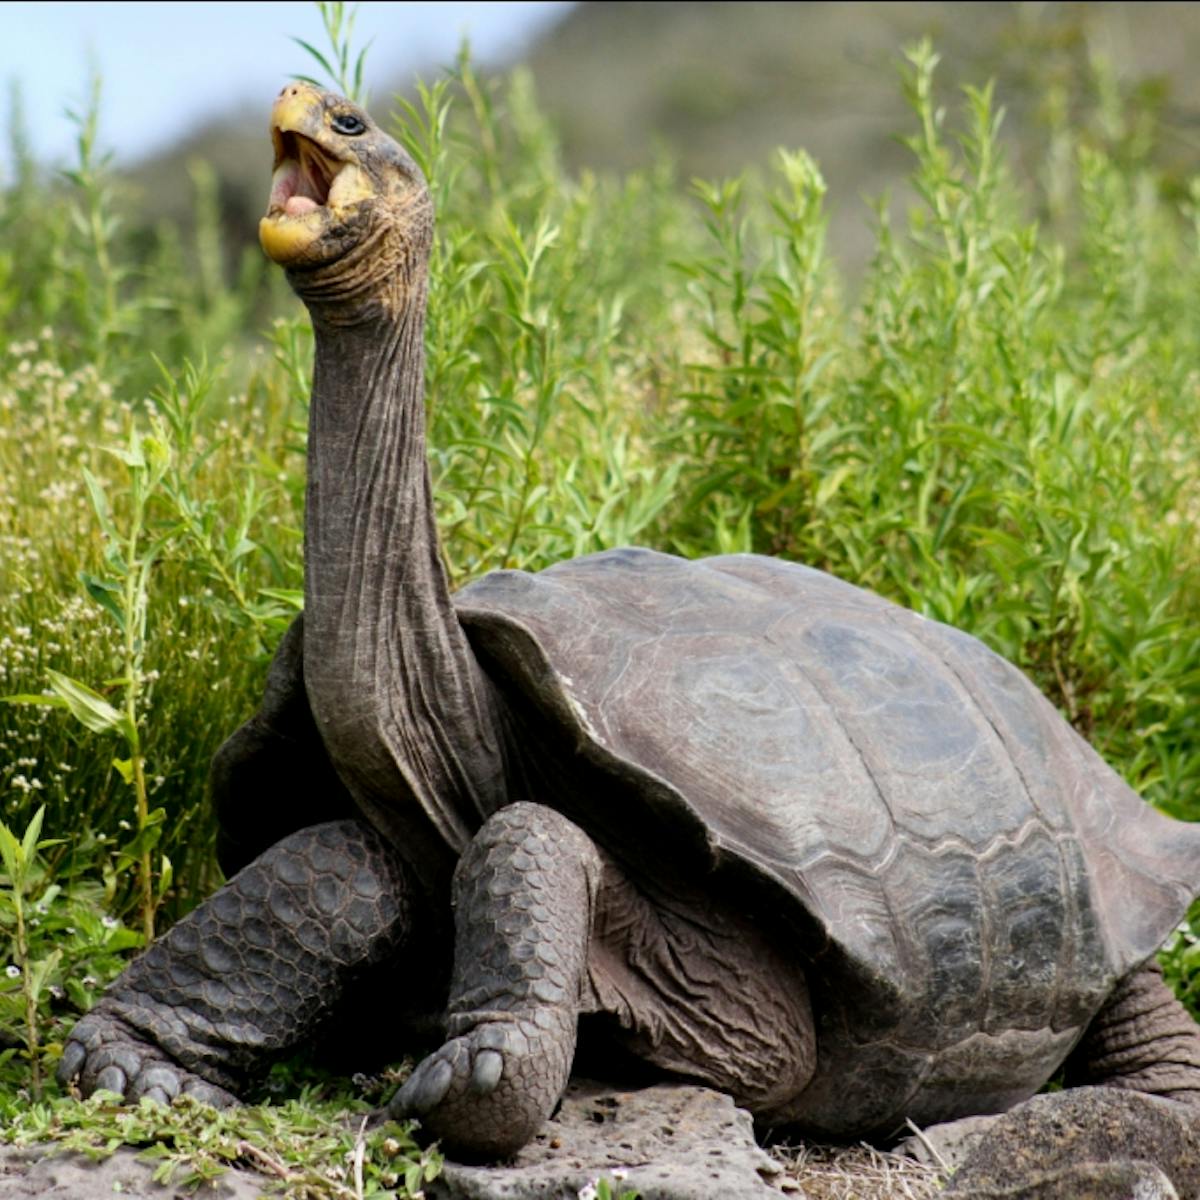 Galapagos giant tortoises make a comeback, thanks to innovative  conservation strategies